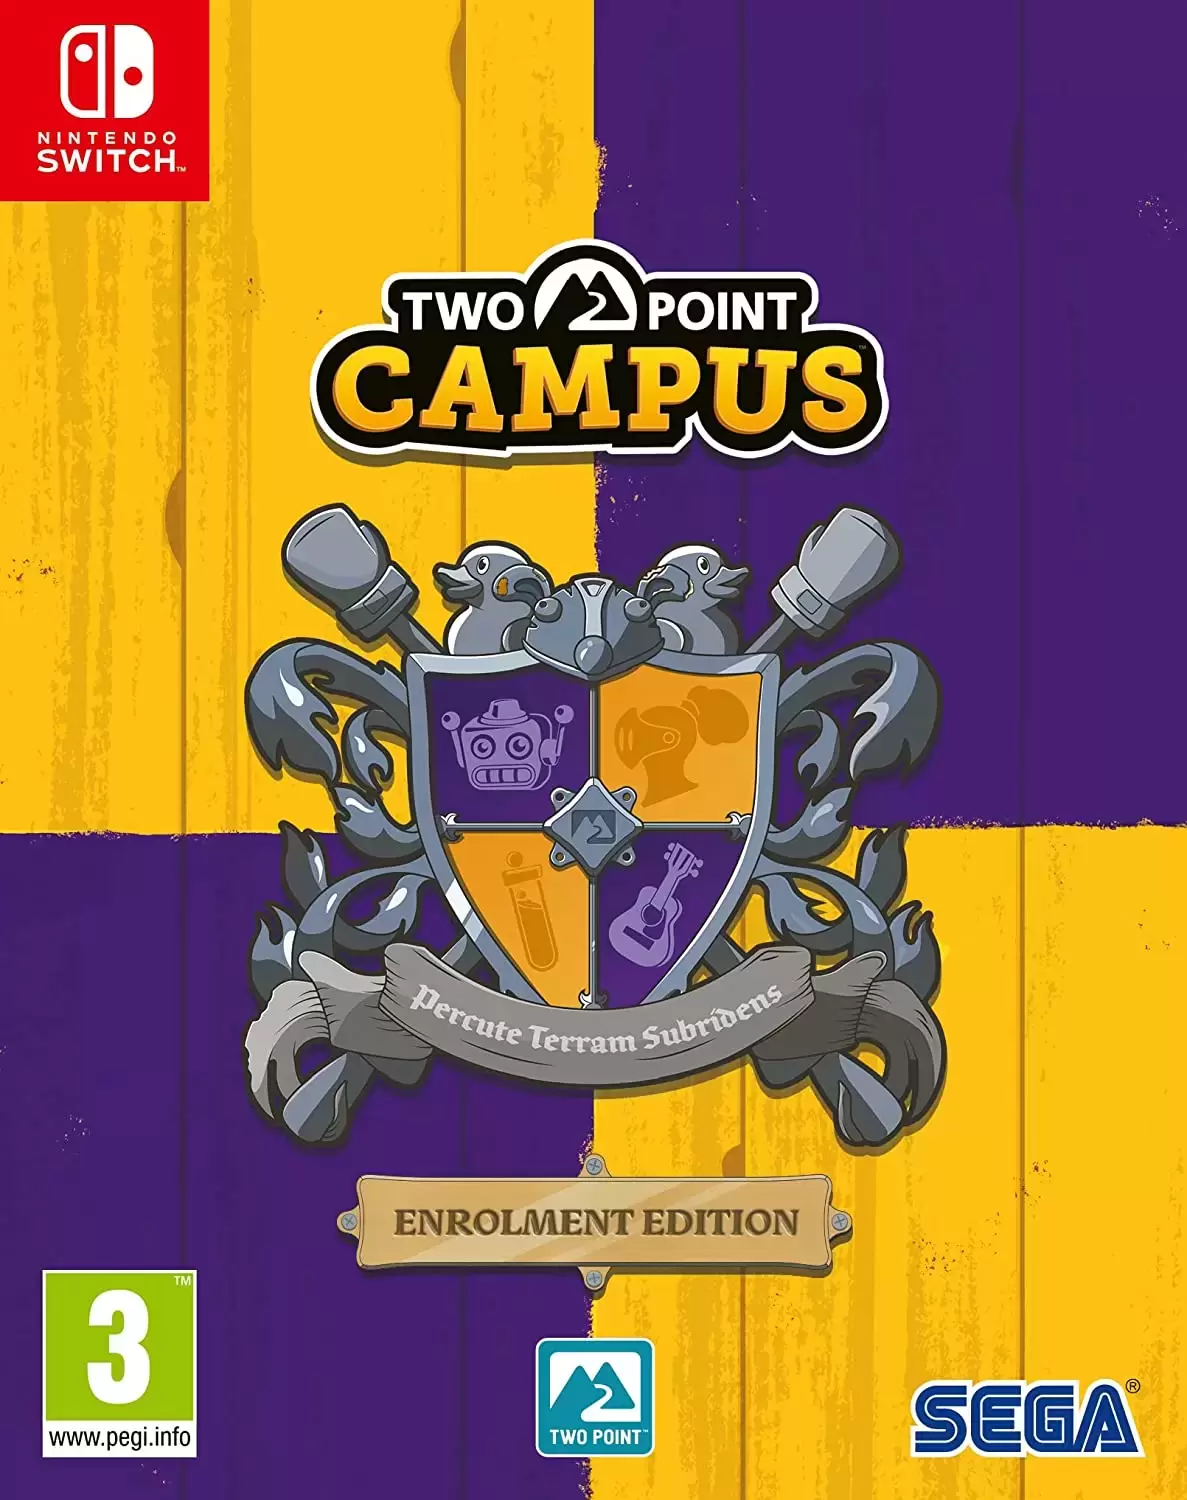 Nintendo Switch Games - Two Point Campus